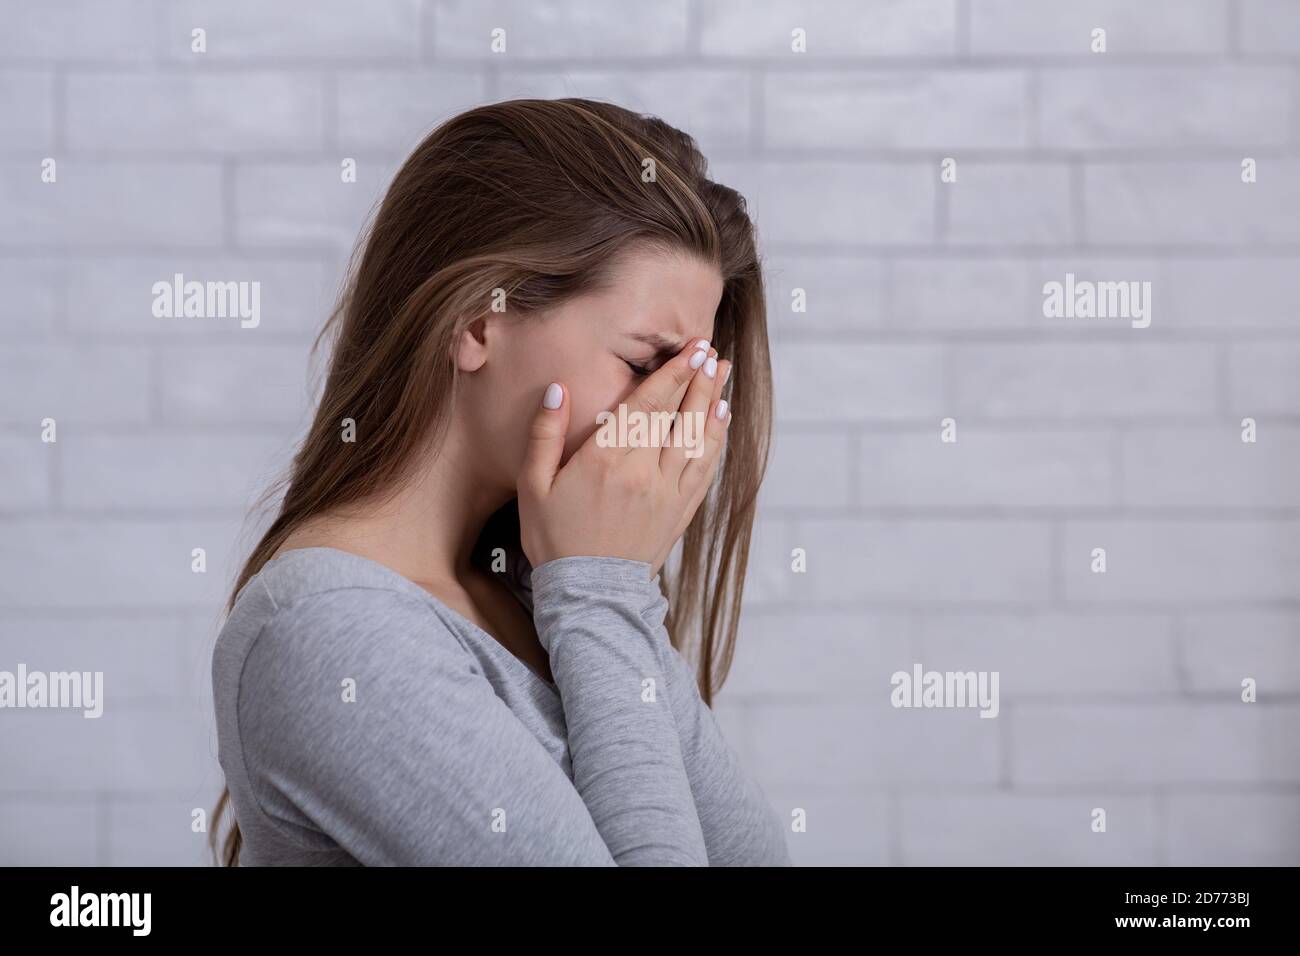 Desperate young woman crying from hopelessness, covering her face with hands, blank space Stock Photo